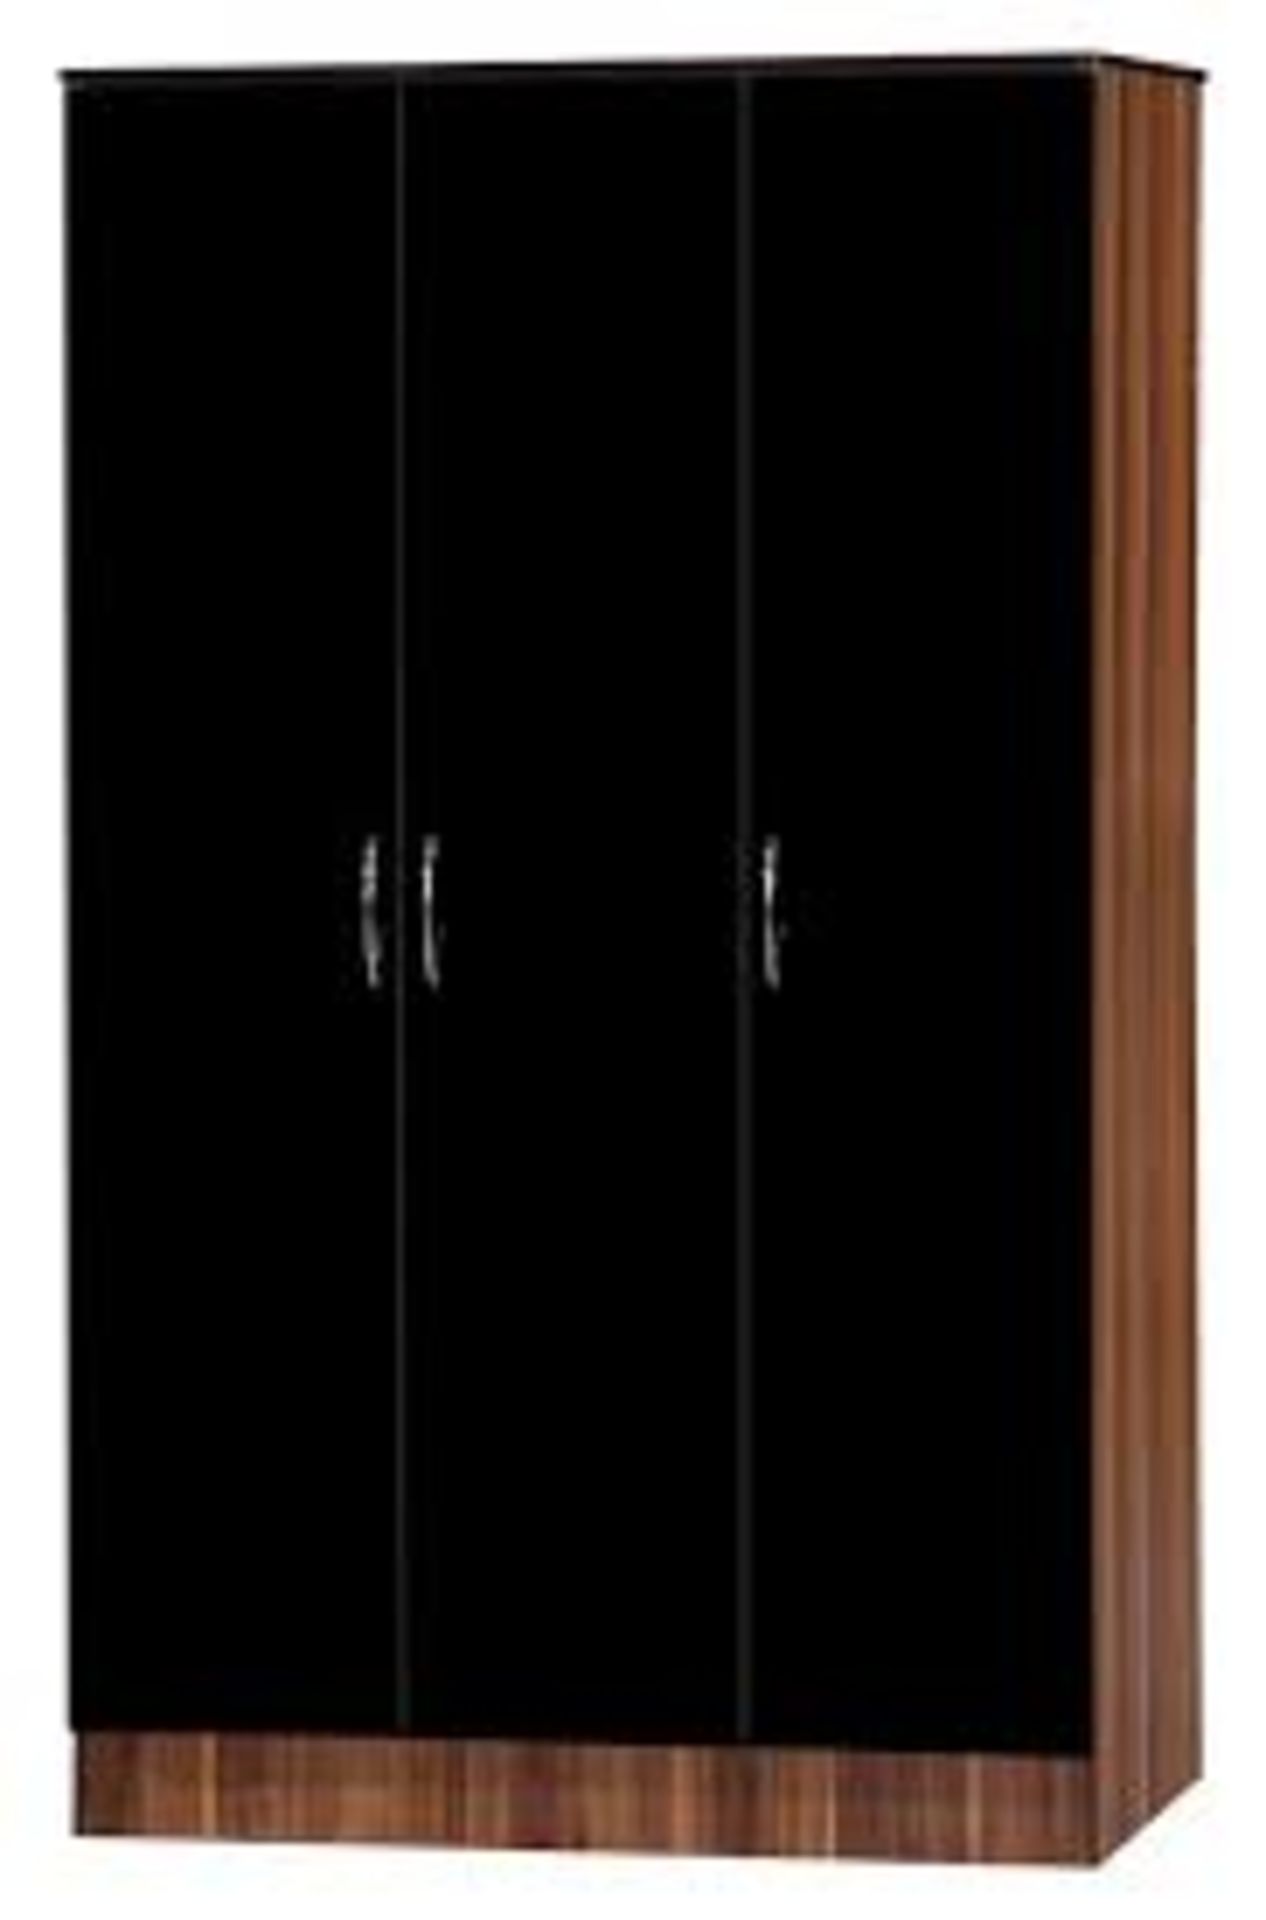 Boxed Black & Walnutt 3 Door Alpha Triple Wardrobe RRP £180 (17905) (PICTURES ARE FOR ILLUSTRATION